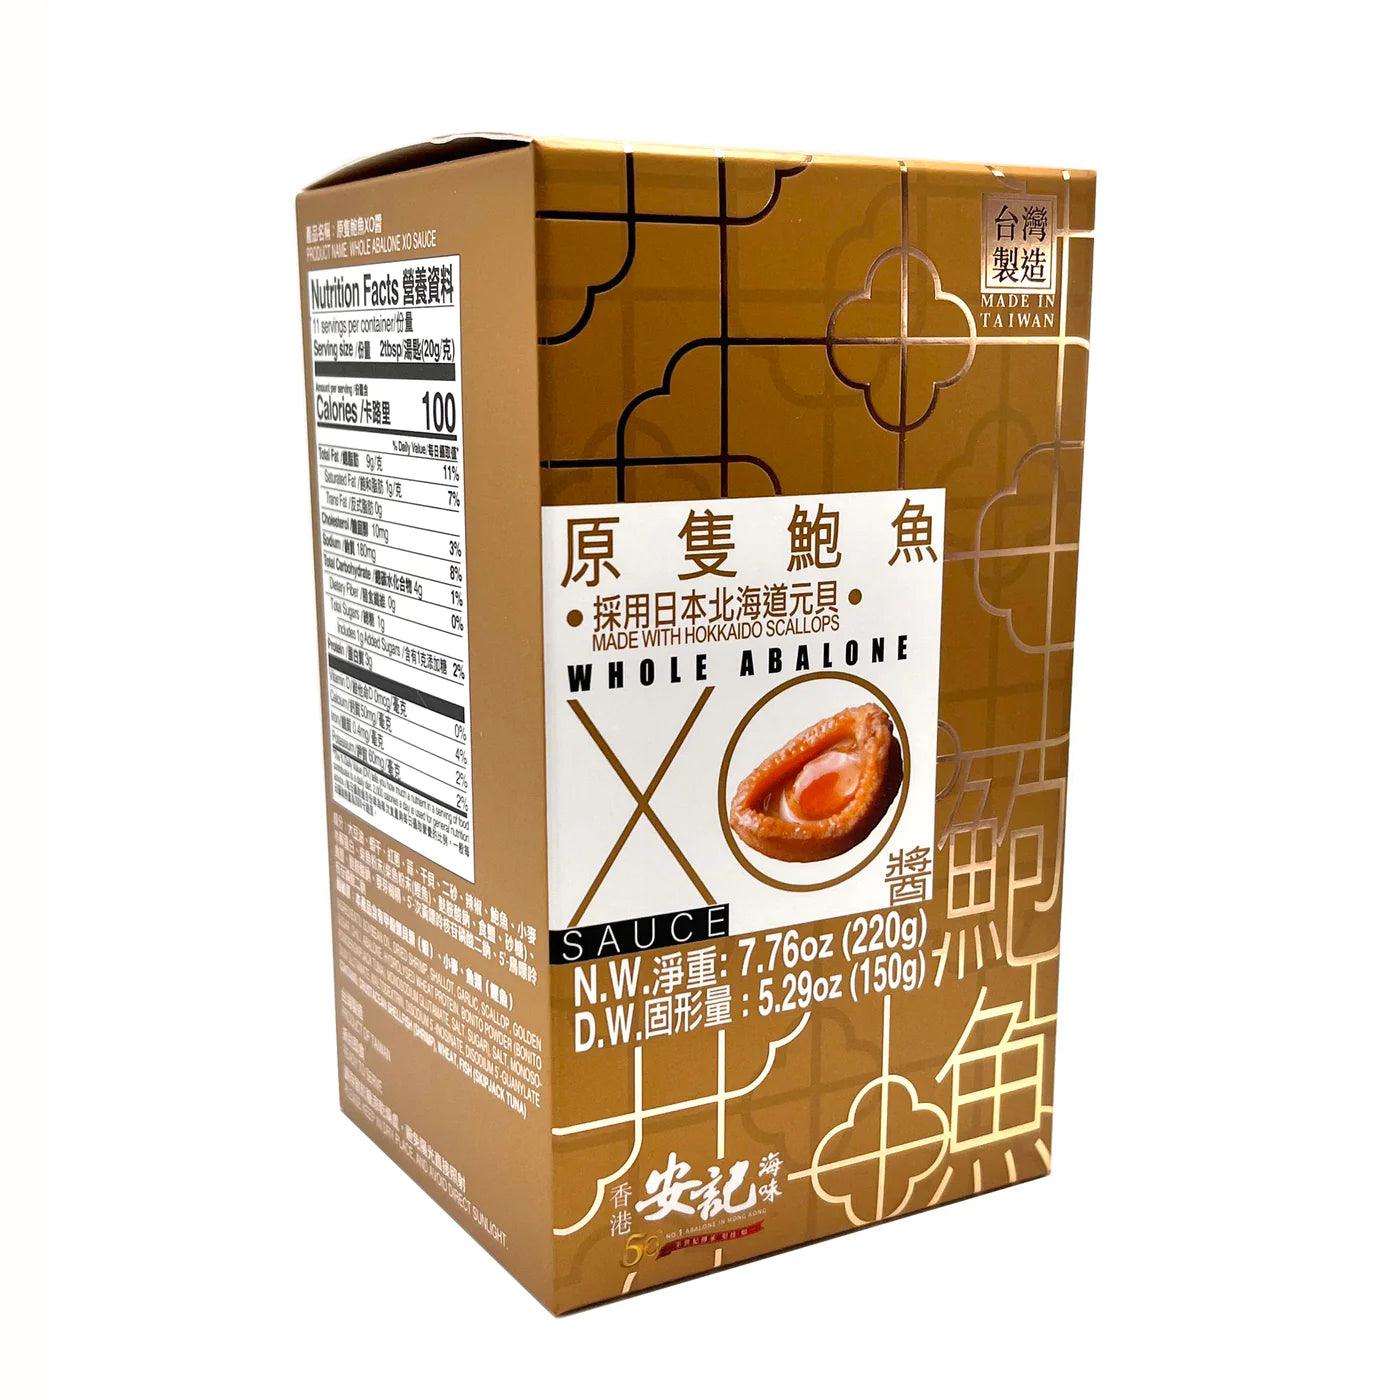 On Kee XO Sauce with Whole Abalone(7.76oz) - Buy at New Green Nutrition